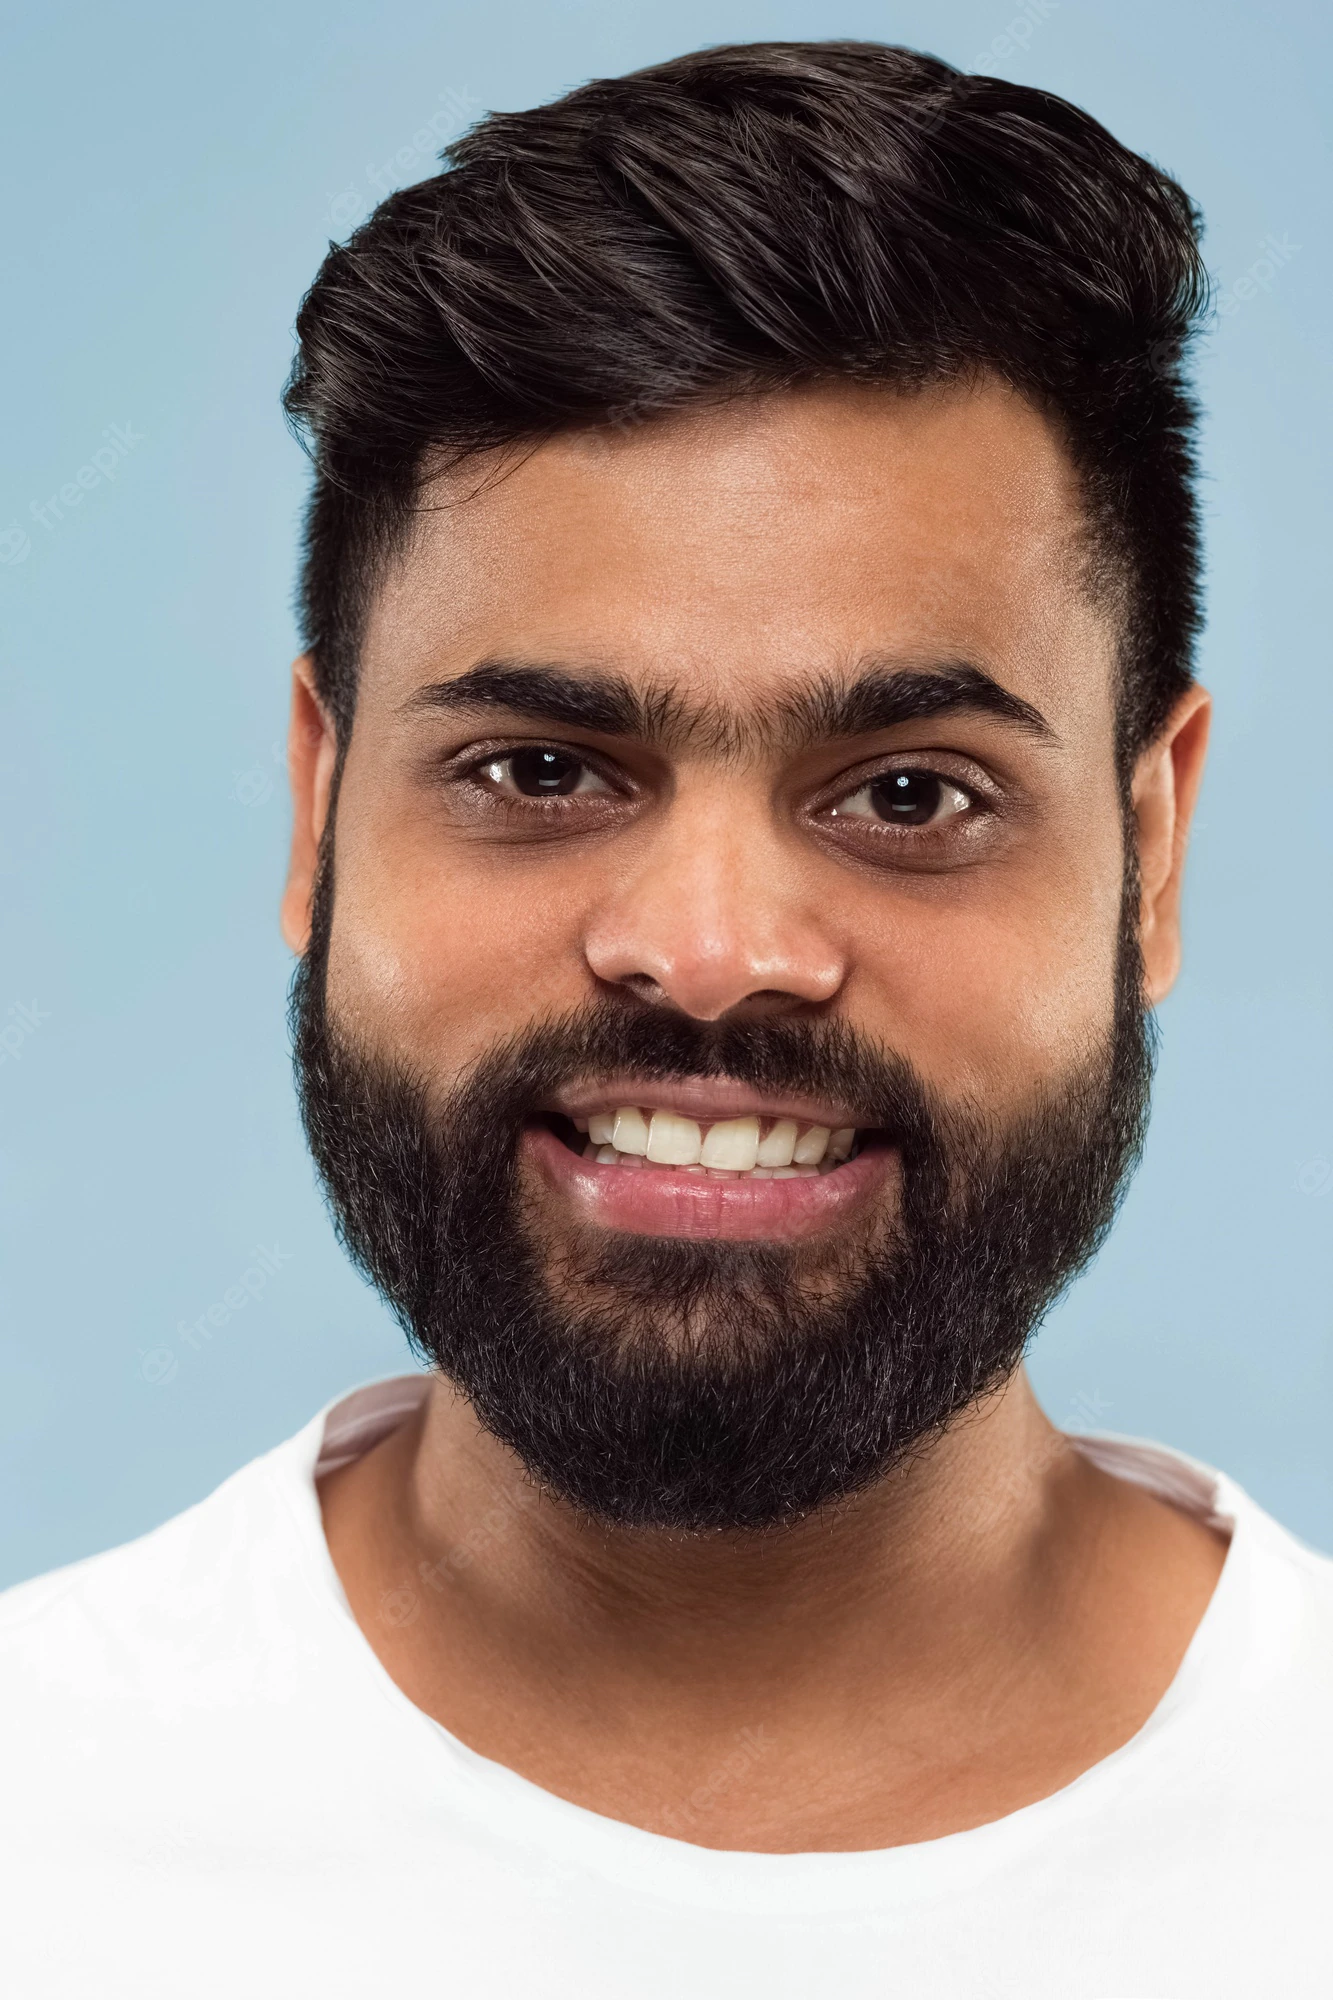 close-up-portrait-young-indian-man-with-beard-white-shirt-isolated-standing-smiling_155003-23823